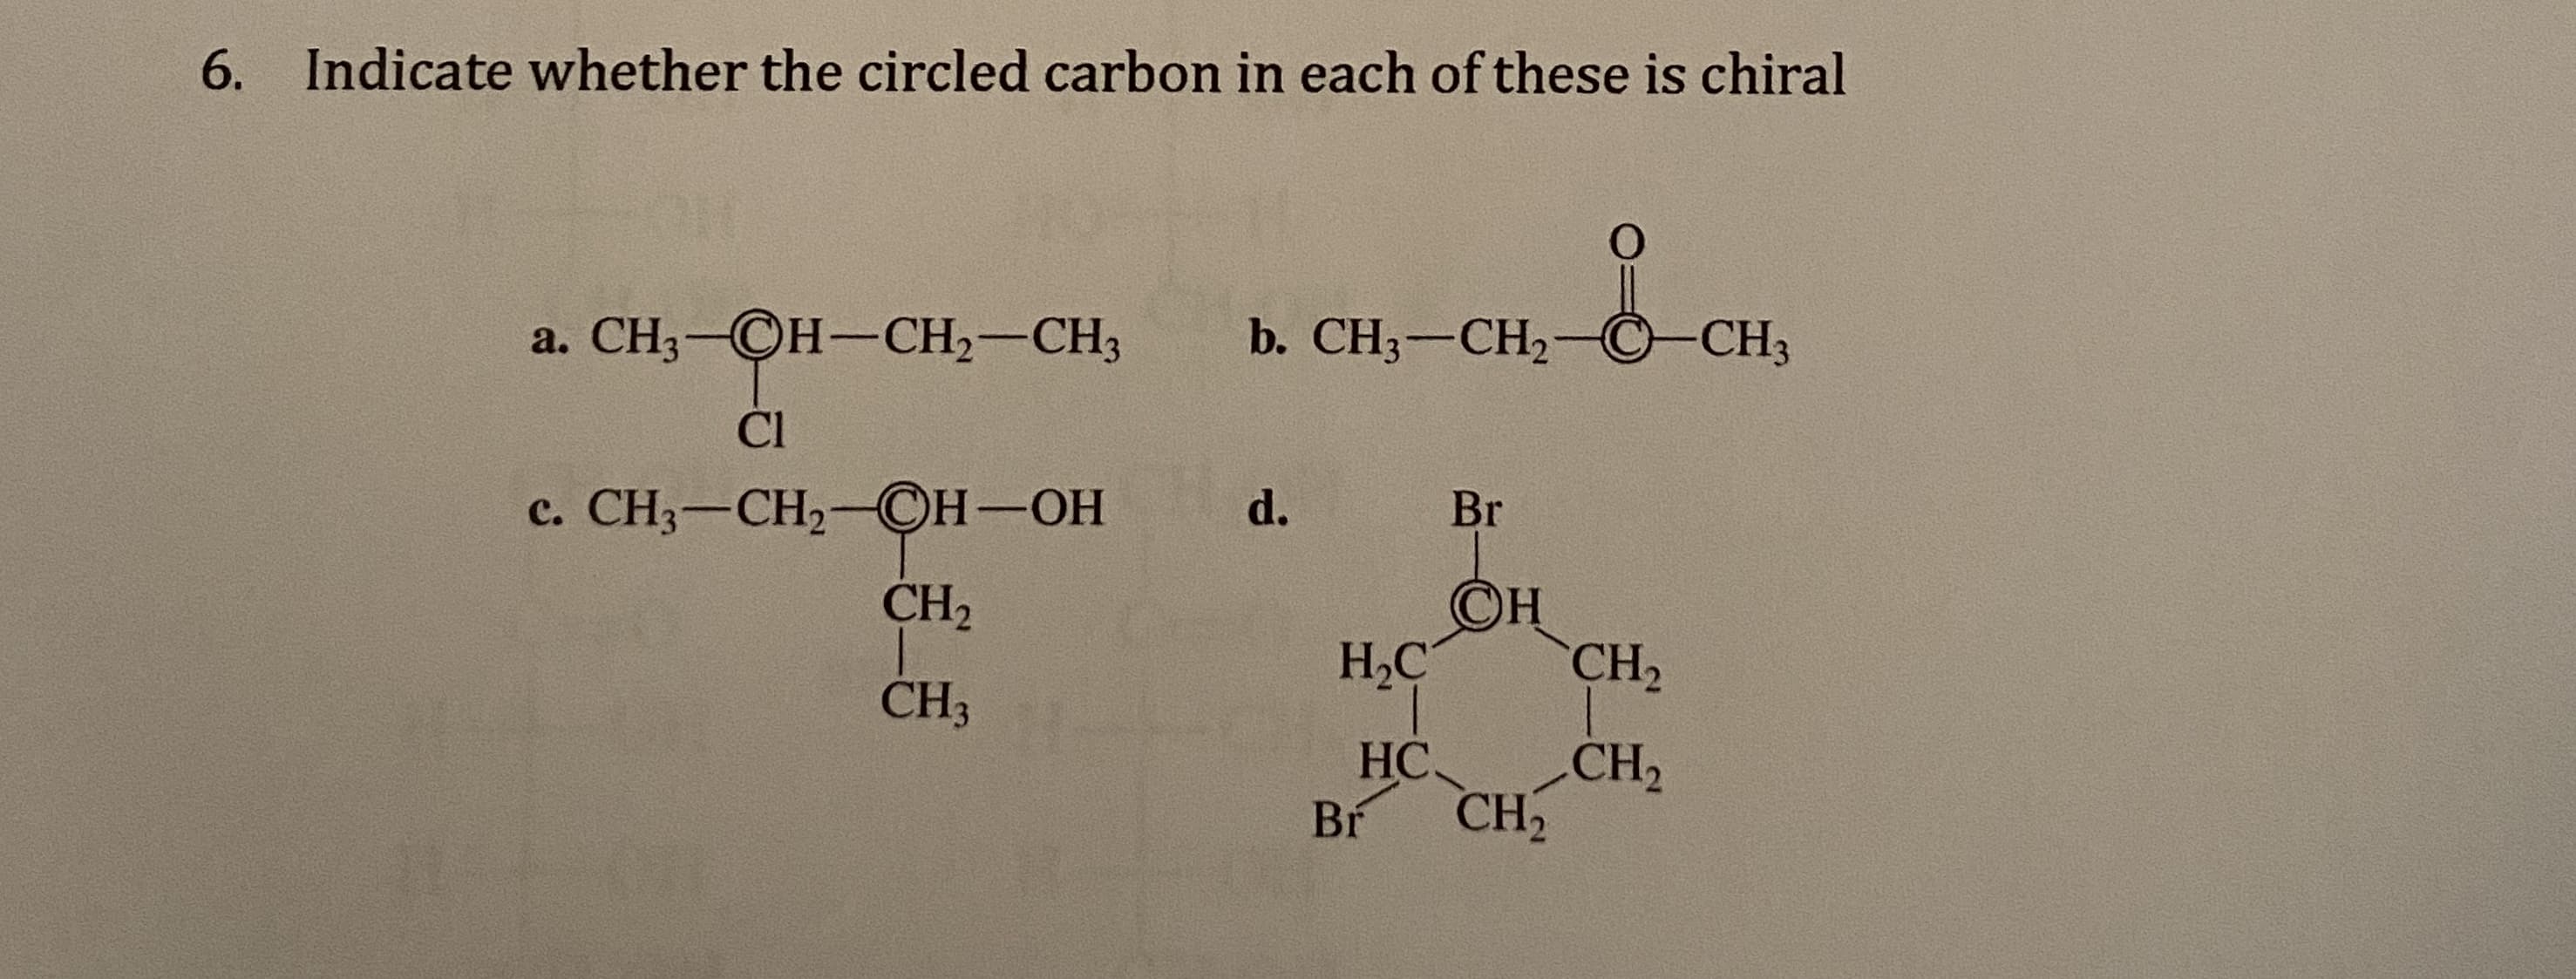 6. Indicate whether the circled carbon in each of these is chiral
a. CH3-CH-CH2-CH3
b. CH3-CH2-C-CH3
Cl
c. CH3-CH2-CH-OH
d.
Br
CH2
©H
H,C
CH2
CH3
HC.
CH2
Br
CH
